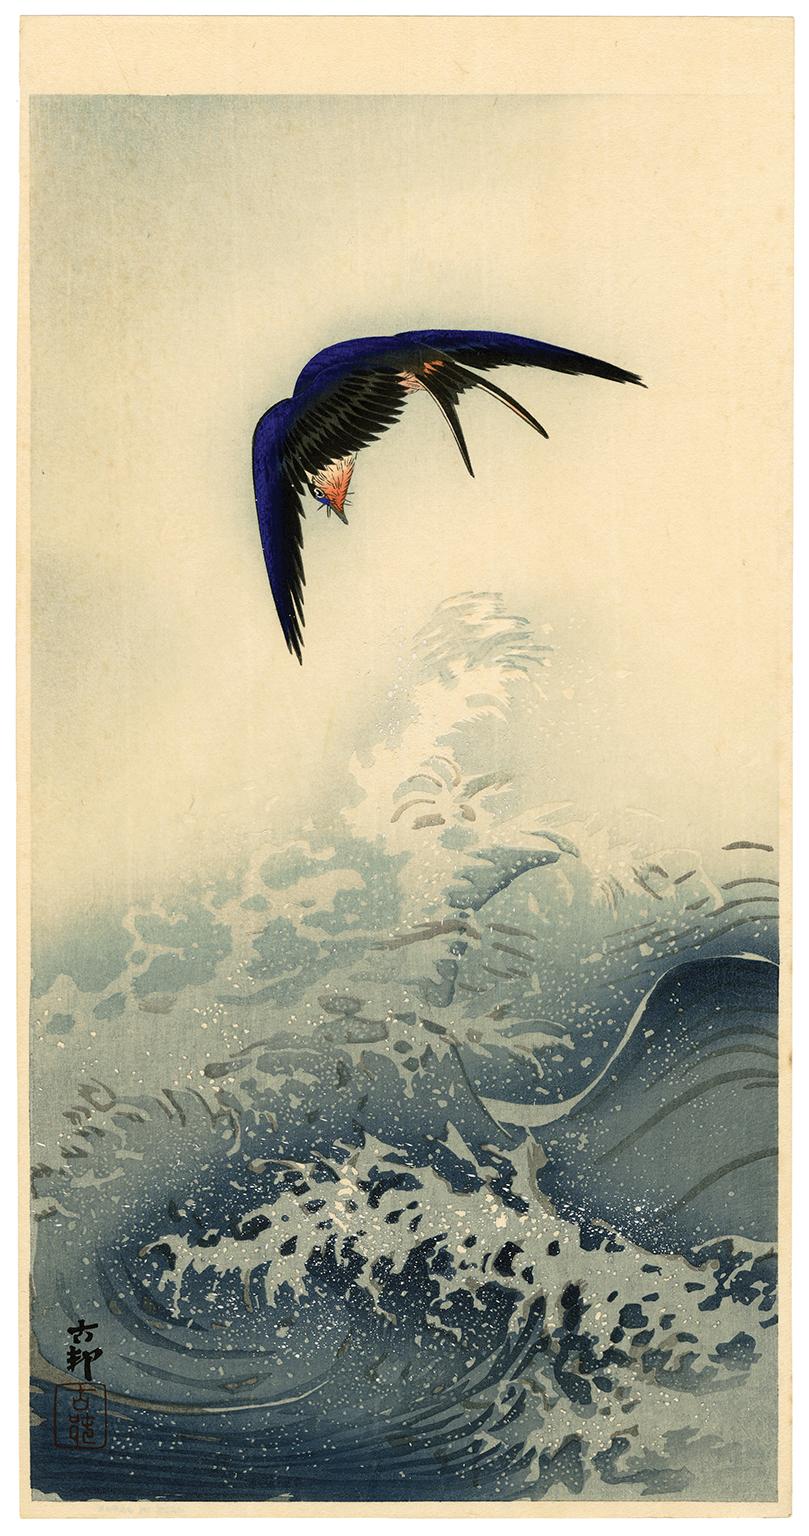 Swallow over the Ocean Waves - Print by Ohara Koson